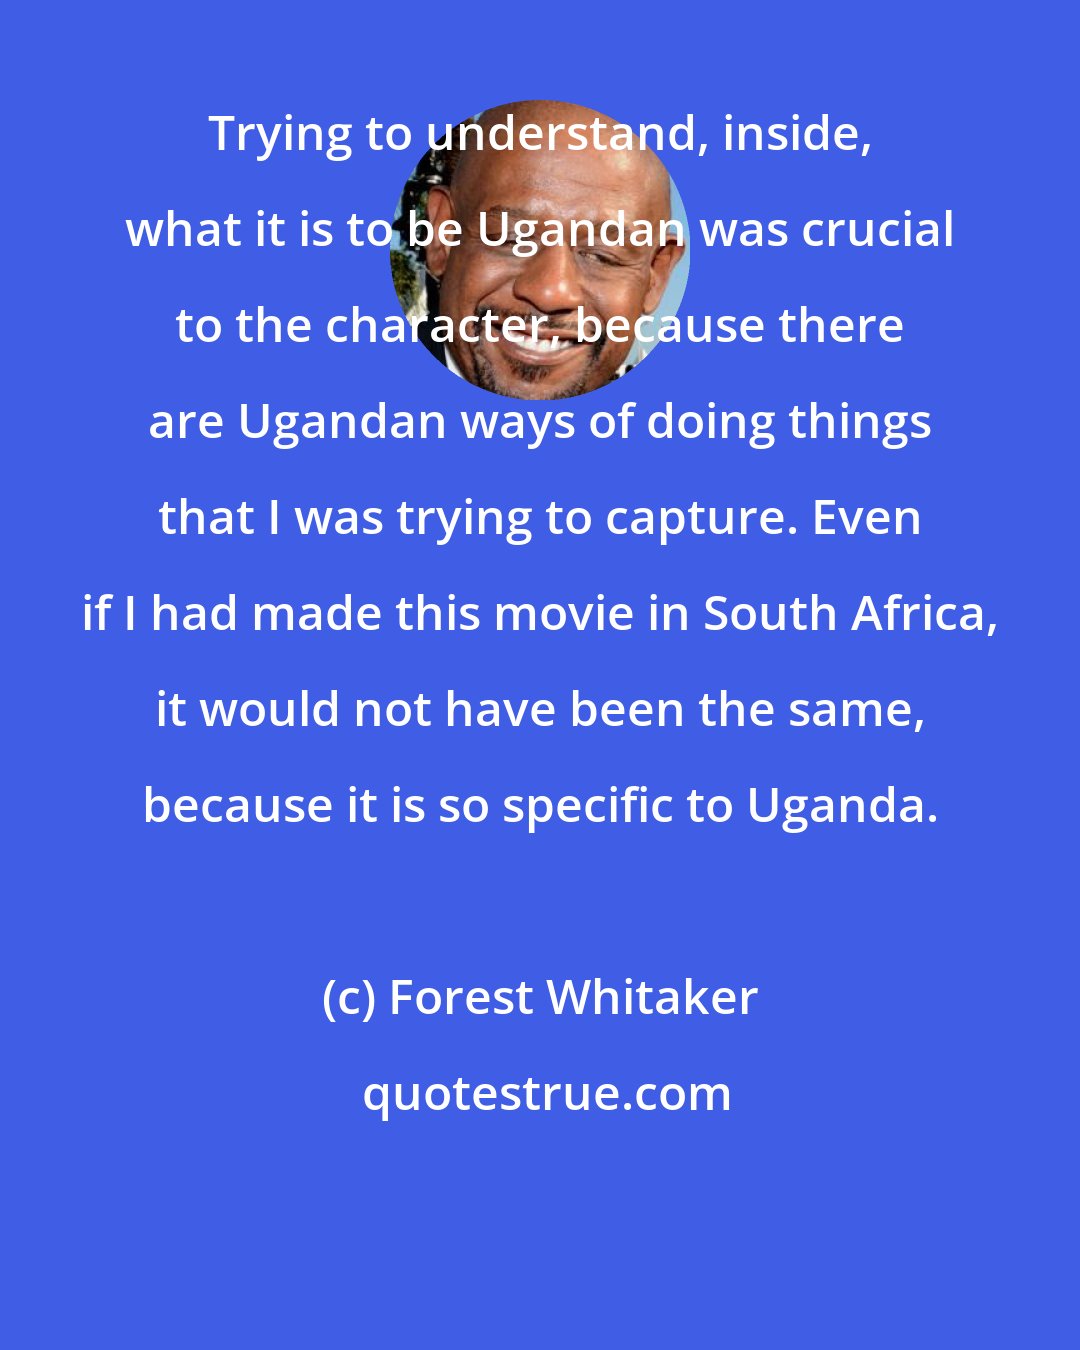 Forest Whitaker: Trying to understand, inside, what it is to be Ugandan was crucial to the character, because there are Ugandan ways of doing things that I was trying to capture. Even if I had made this movie in South Africa, it would not have been the same, because it is so specific to Uganda.